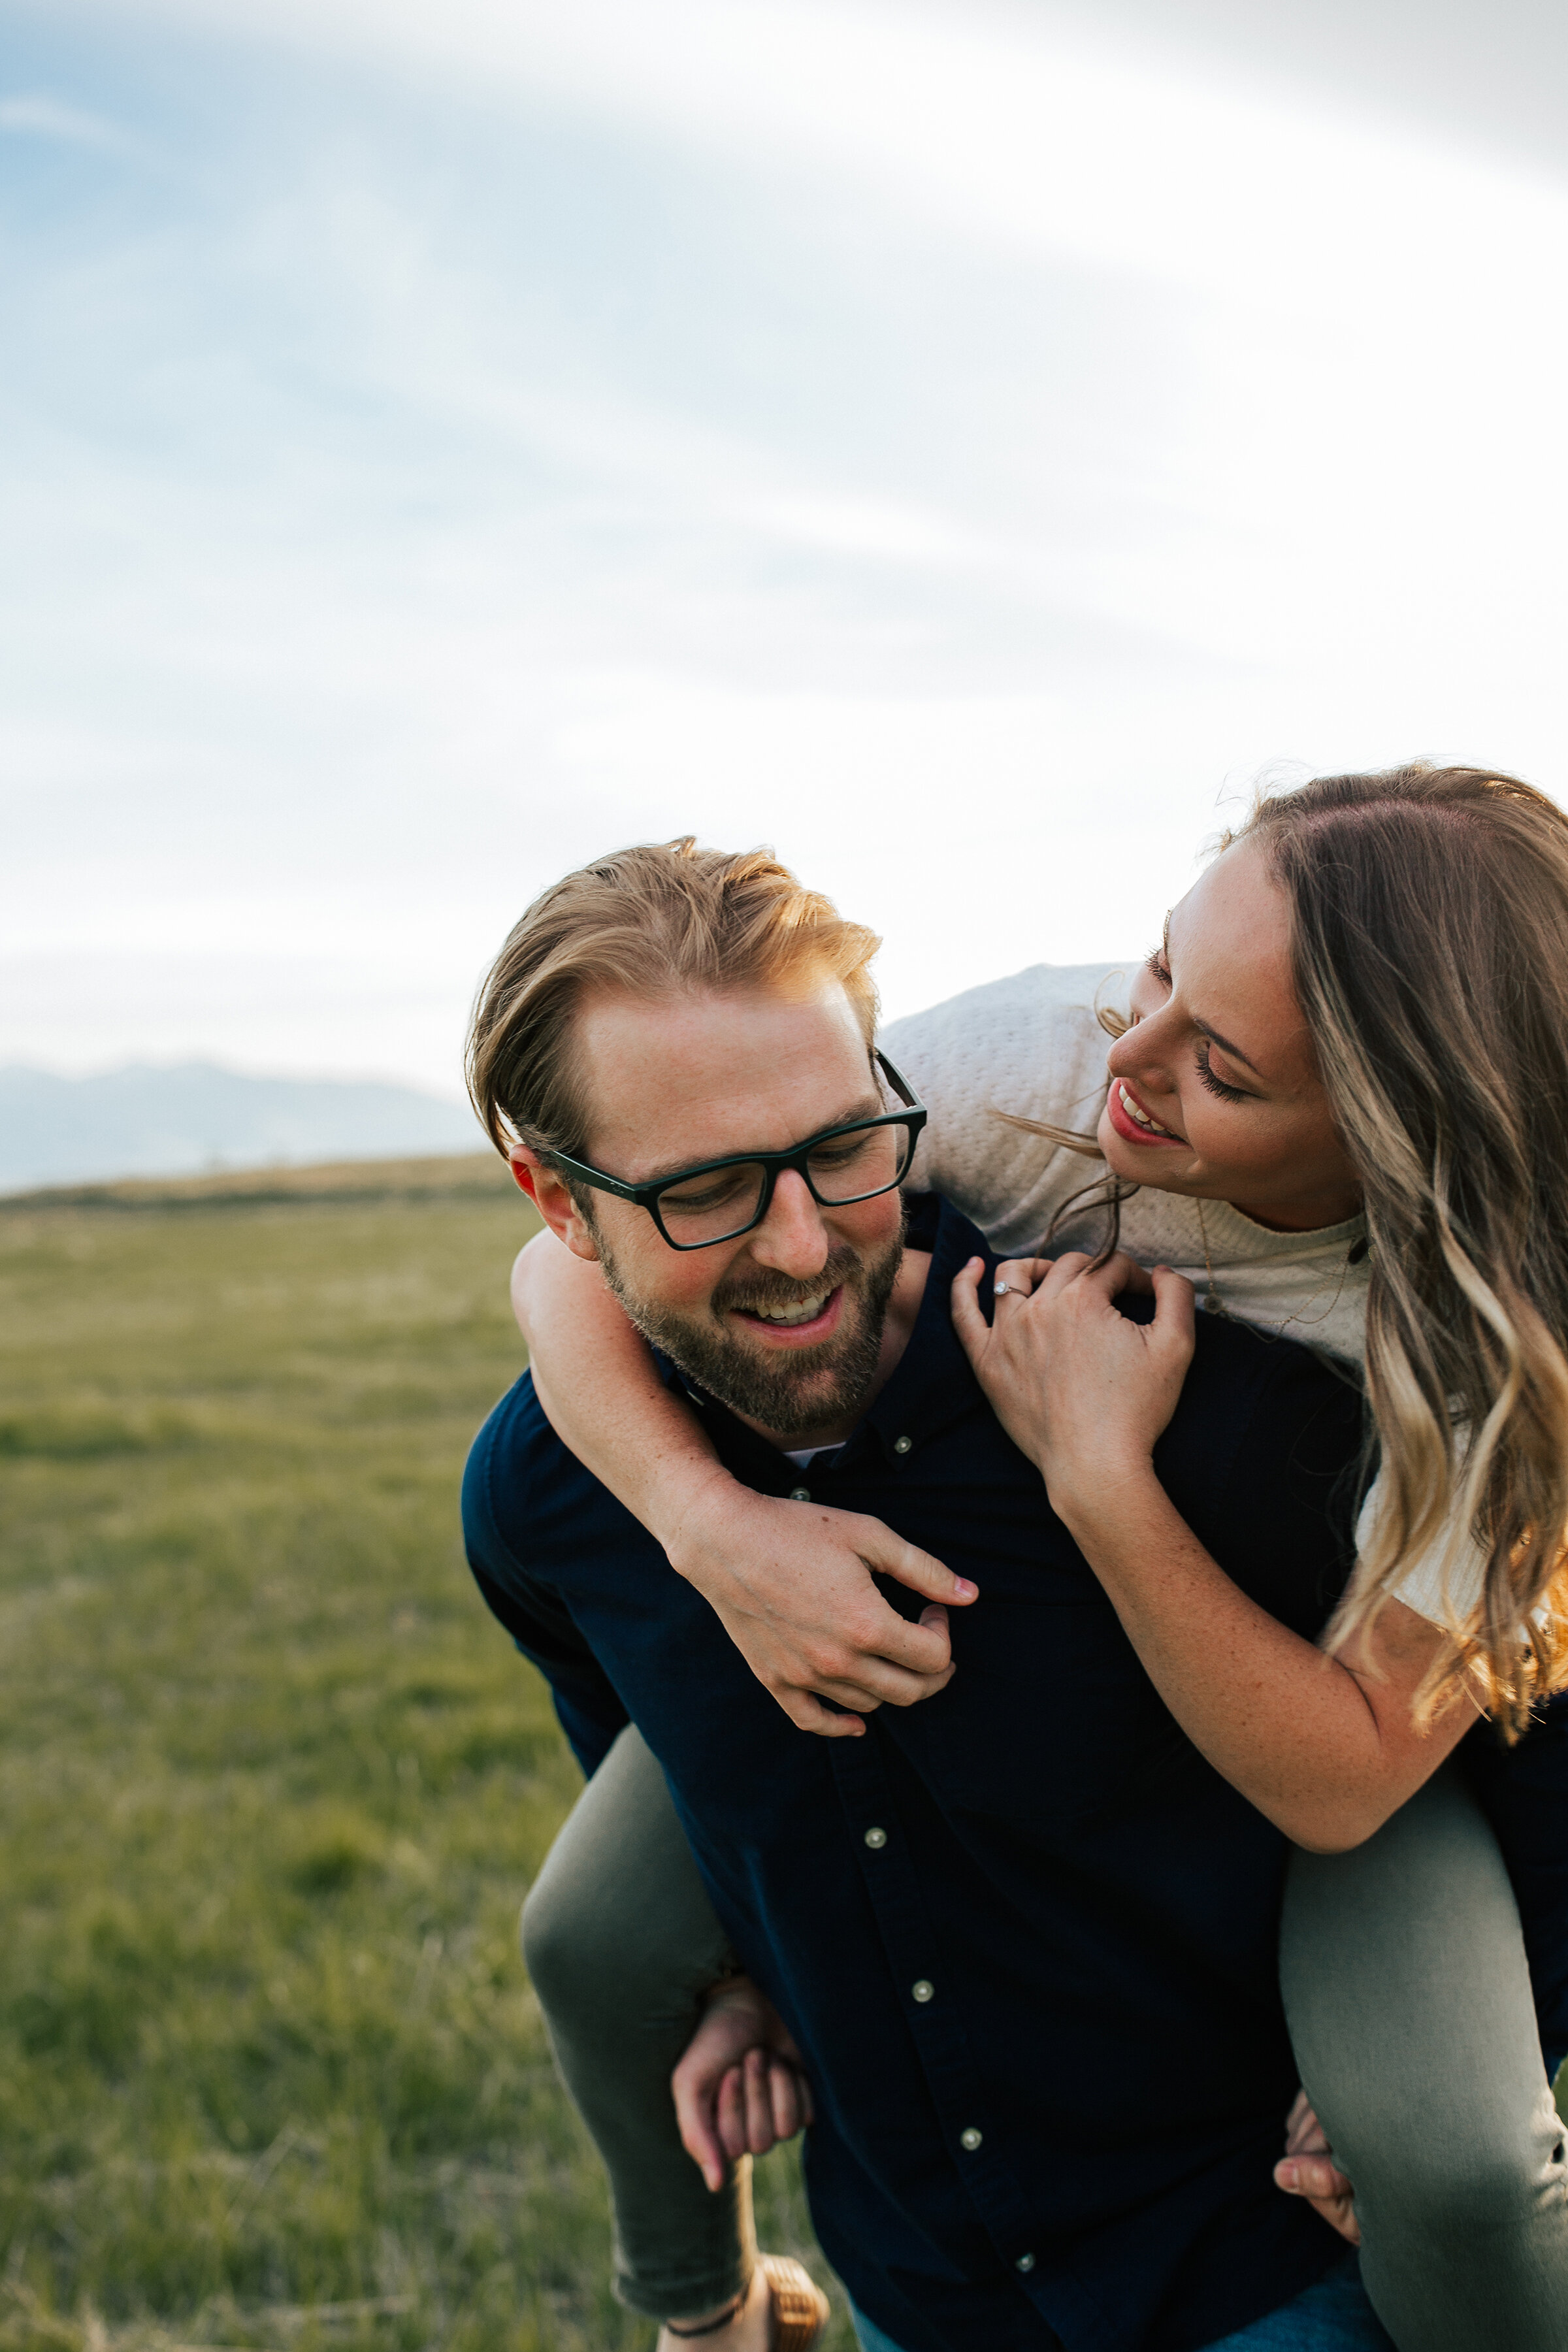  A man gives his fiancé a piggy back ride in a playful engagement session in the summer. Emily Jenkins Photography professional Utah photography playful couple pose inspiration ideas and goals couple goals outdoor engagement session inspiration ideas